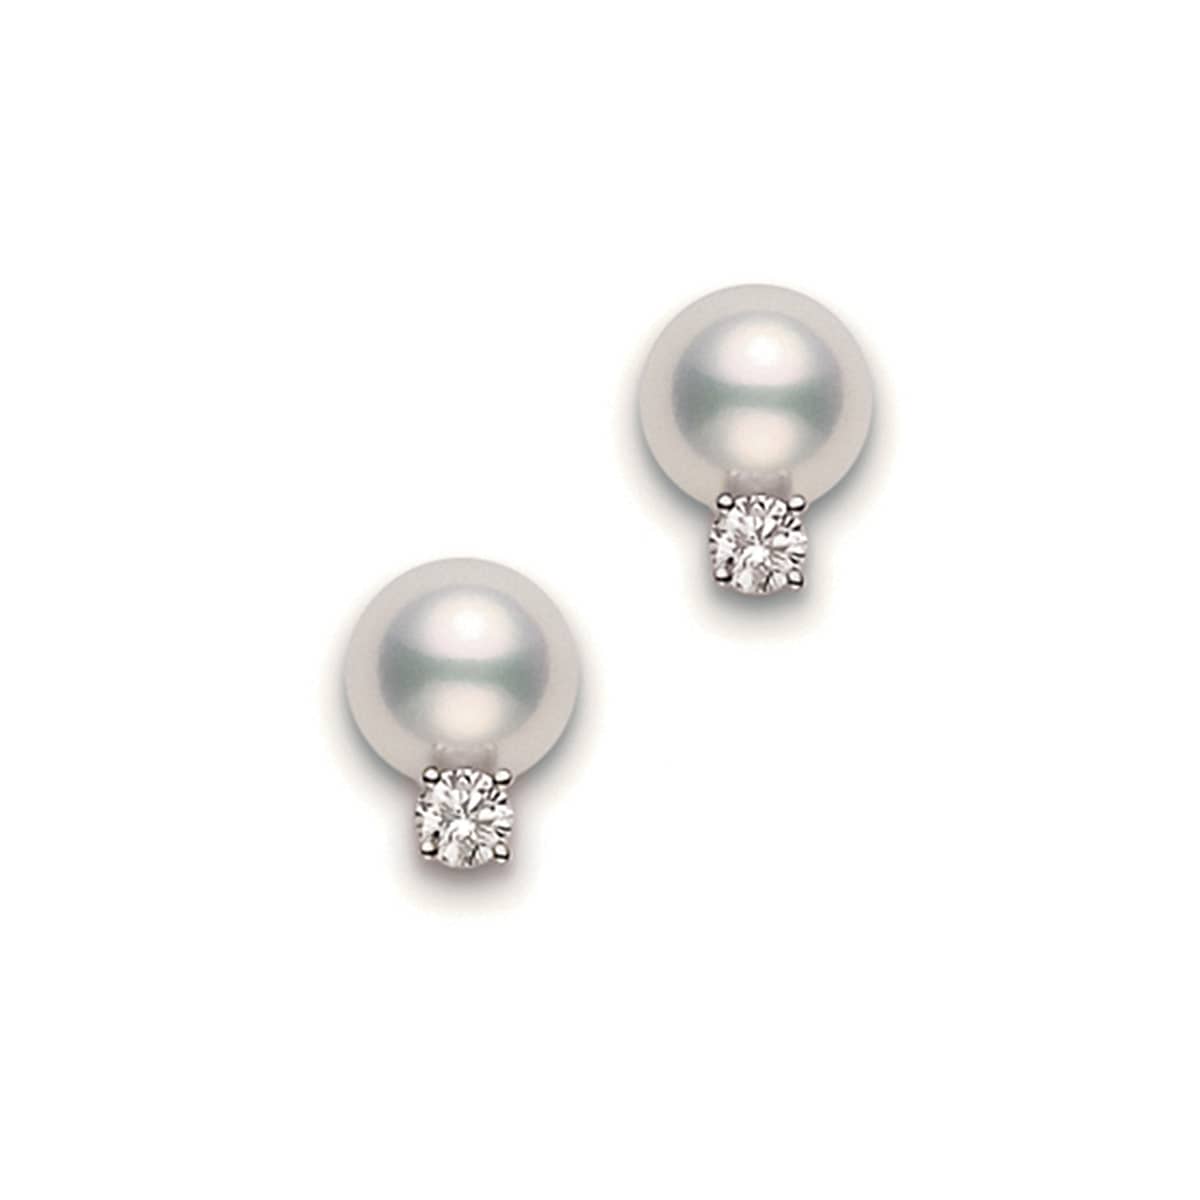 18k White gold set pearl and diamond studs. 6.0 x 6.5mm AA graded pearls with dia.06